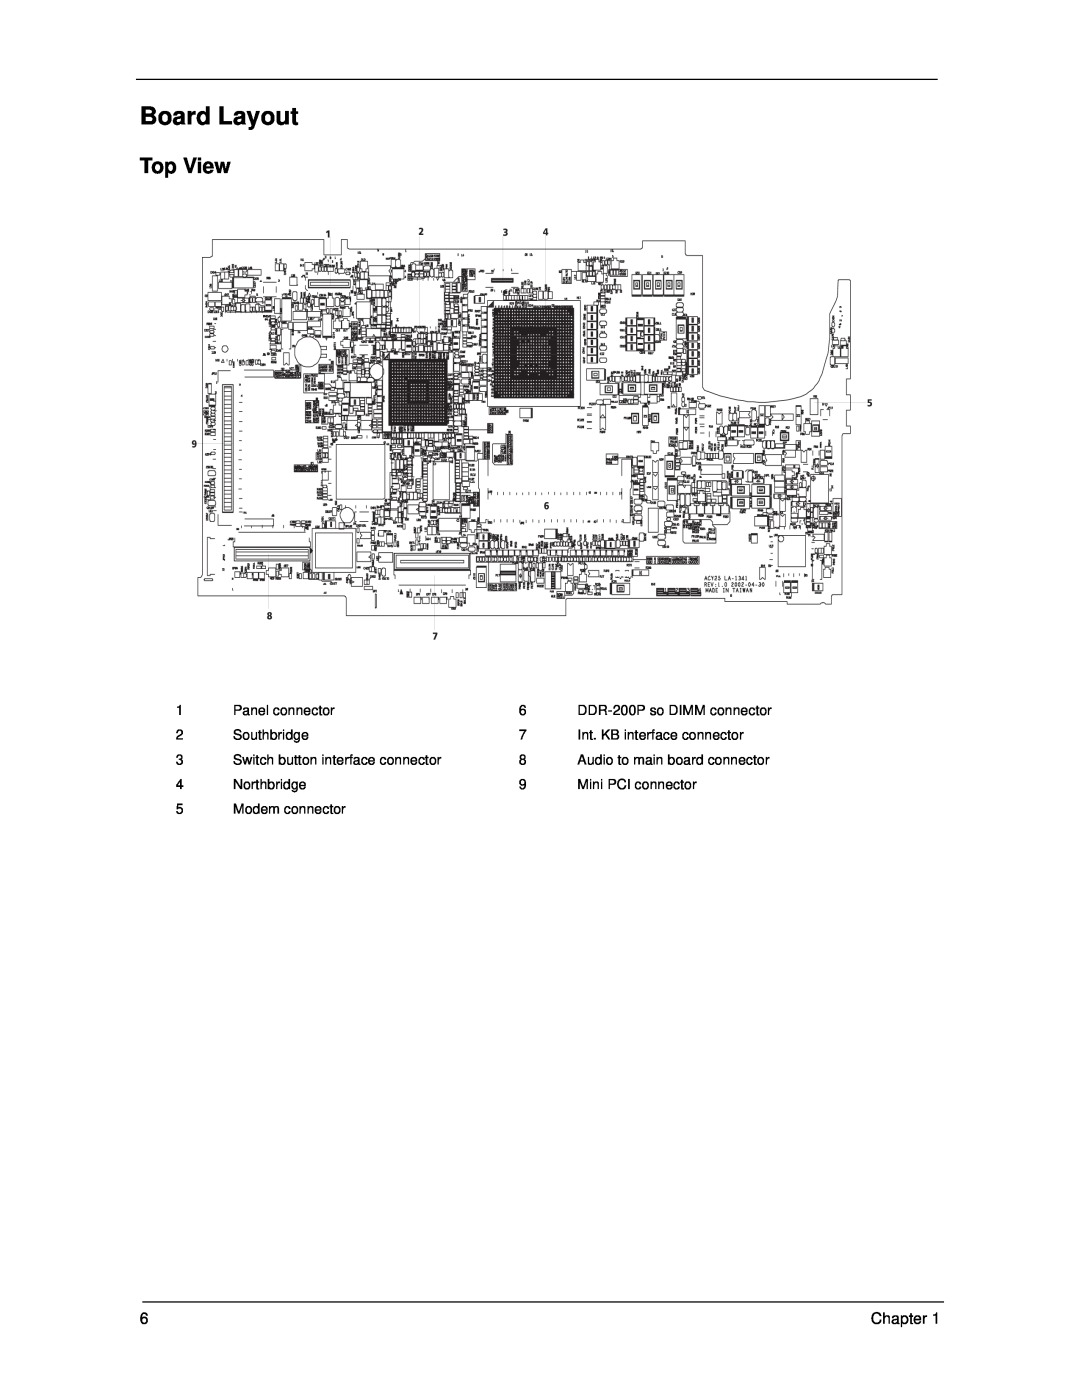 Acer 270 manual Board Layout, Top View, Audio to main board connector 